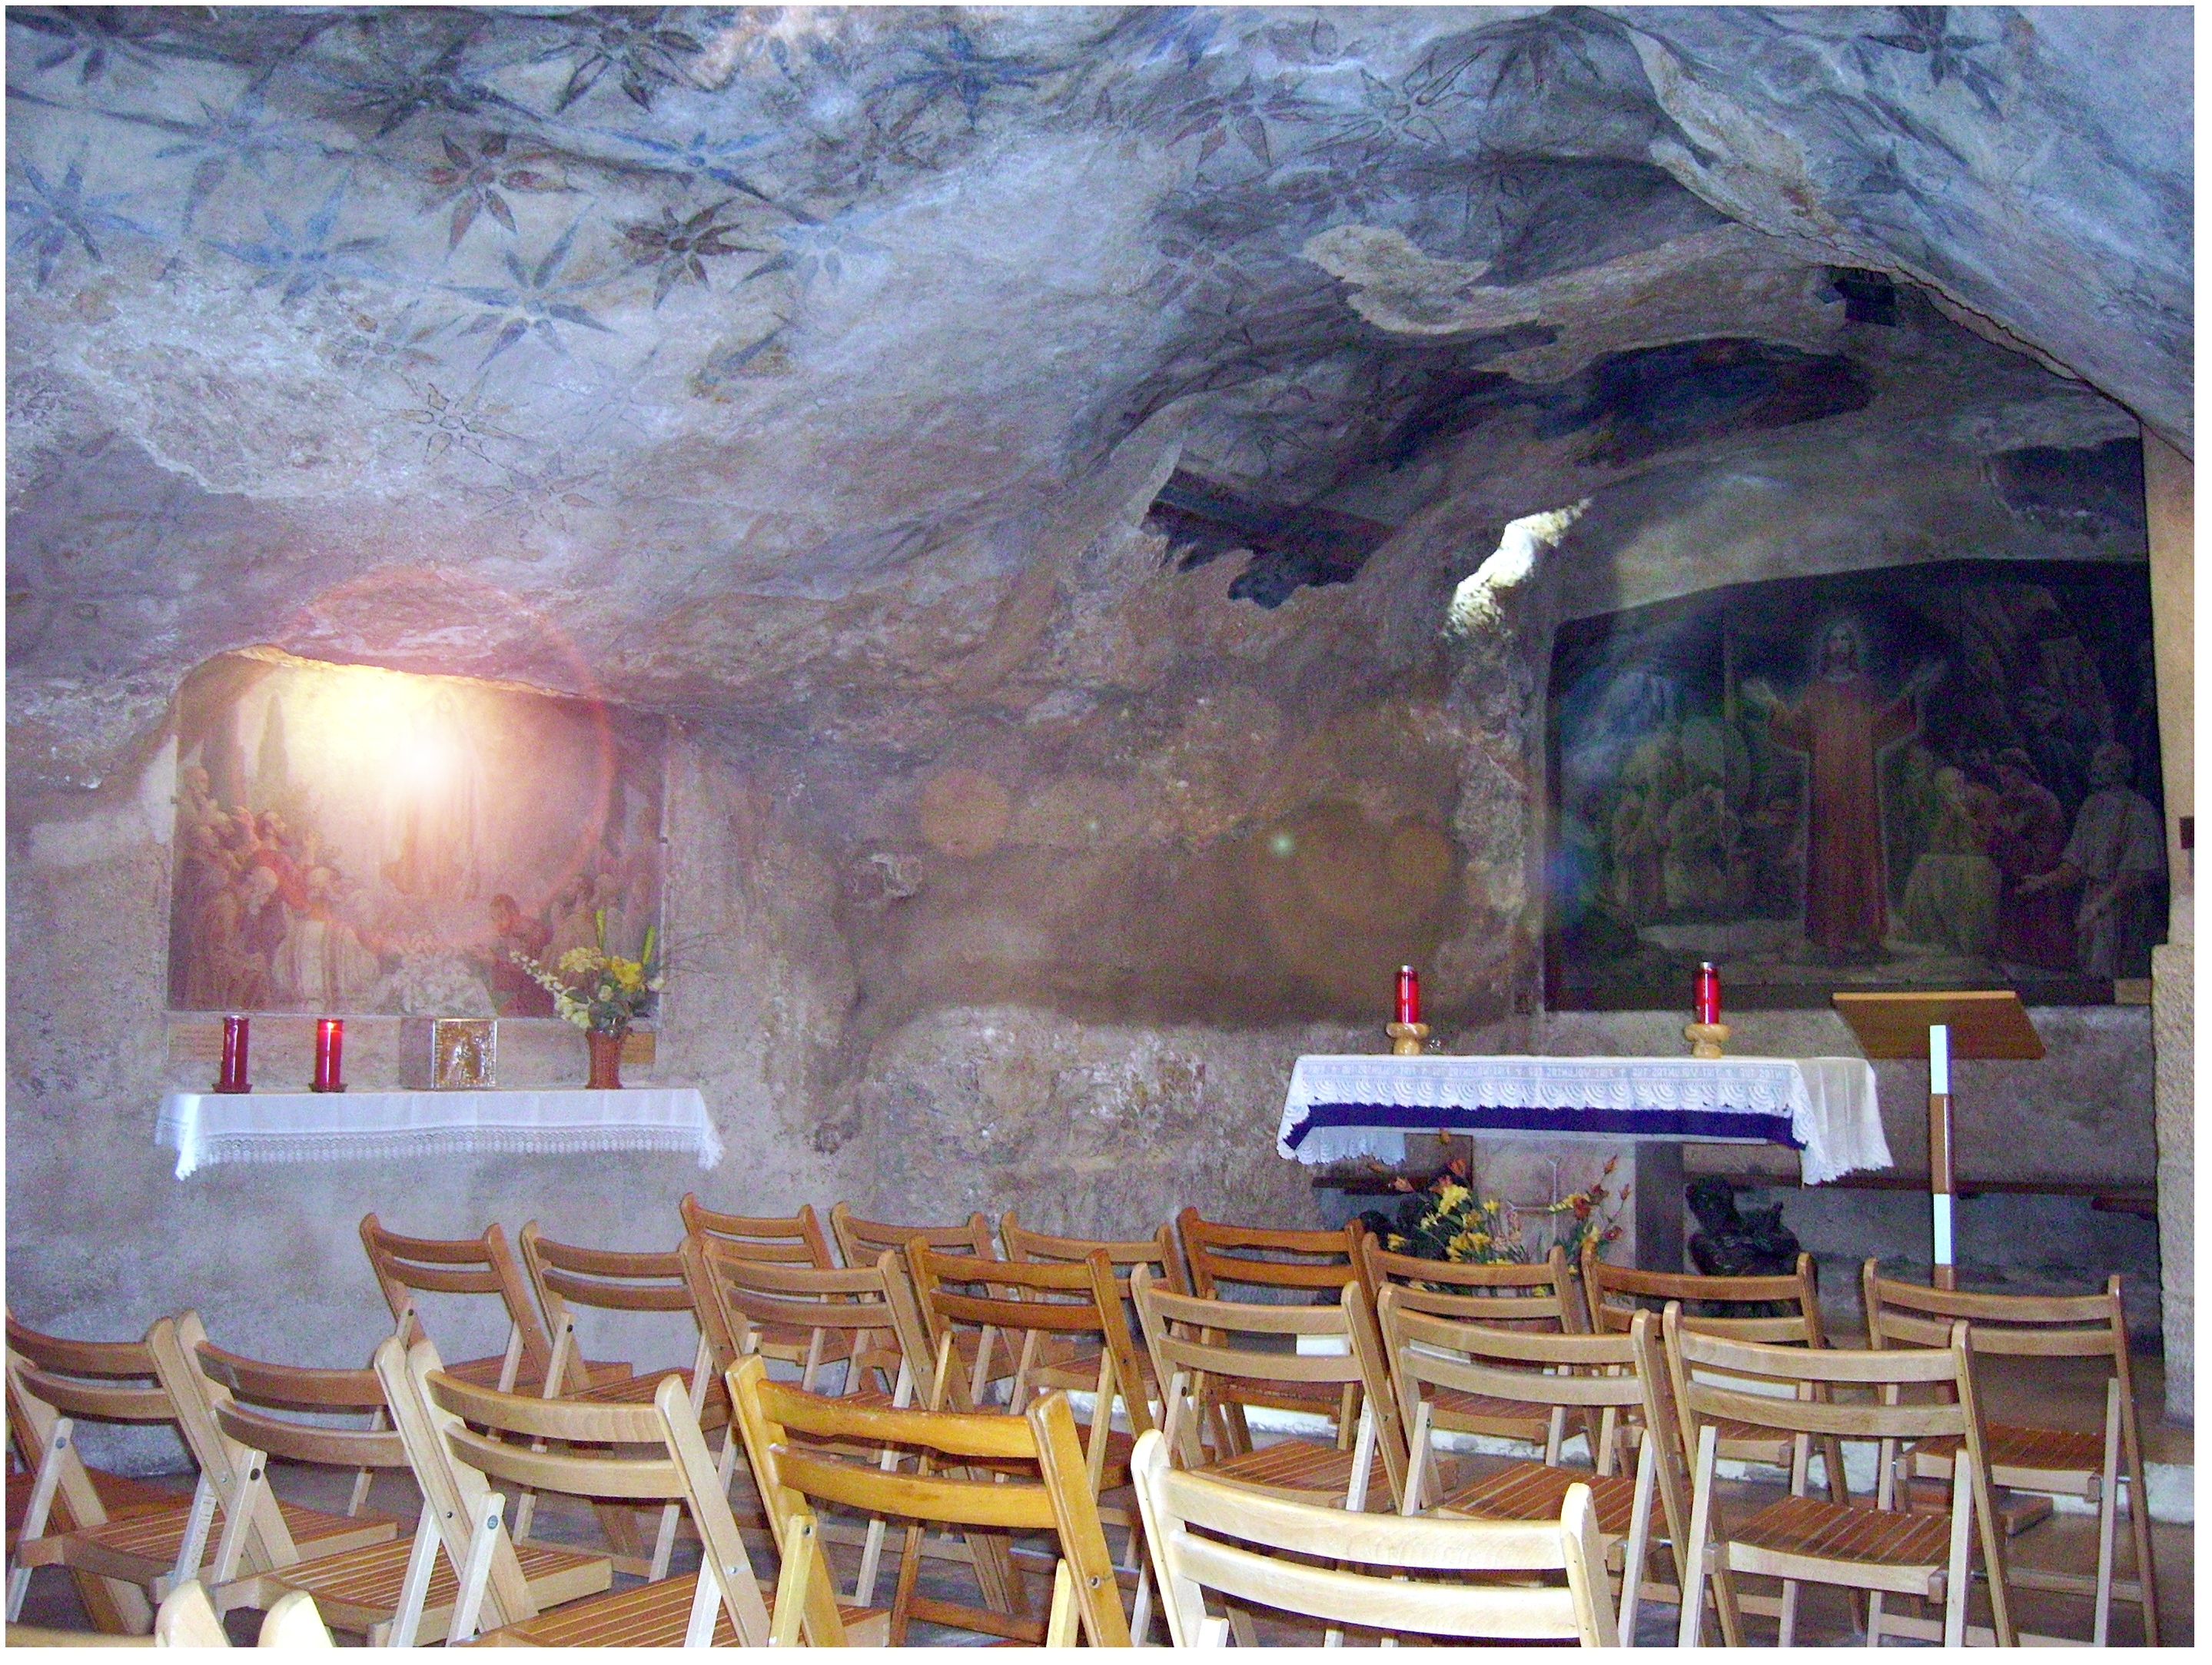 The Grotto in Gethsemane